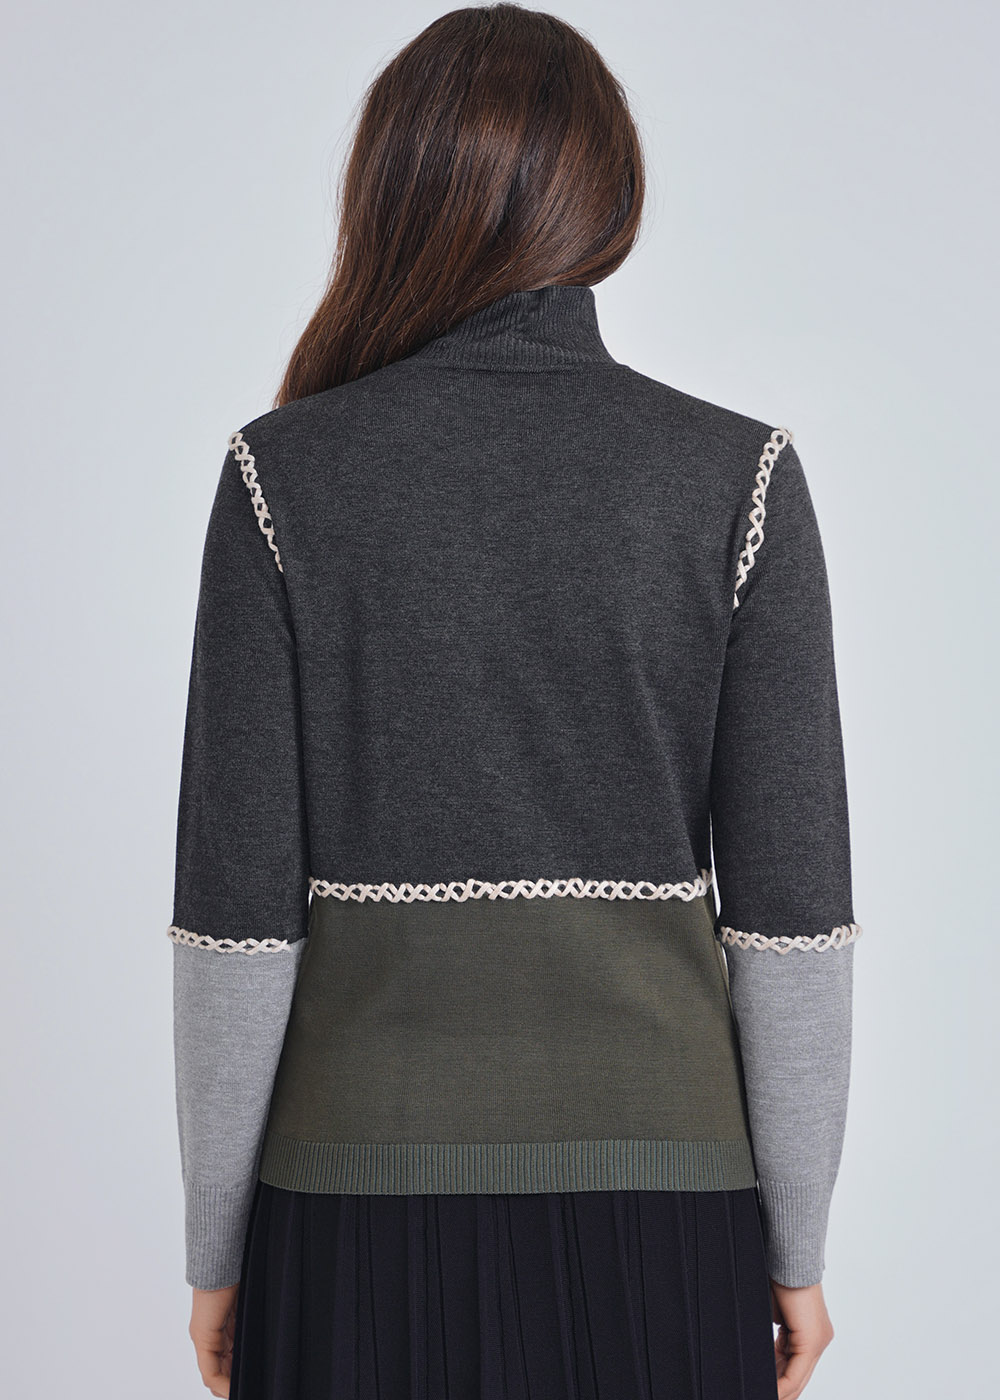 Cozy Grey Knit: Sweater with Color Block Patterns & Embroidery